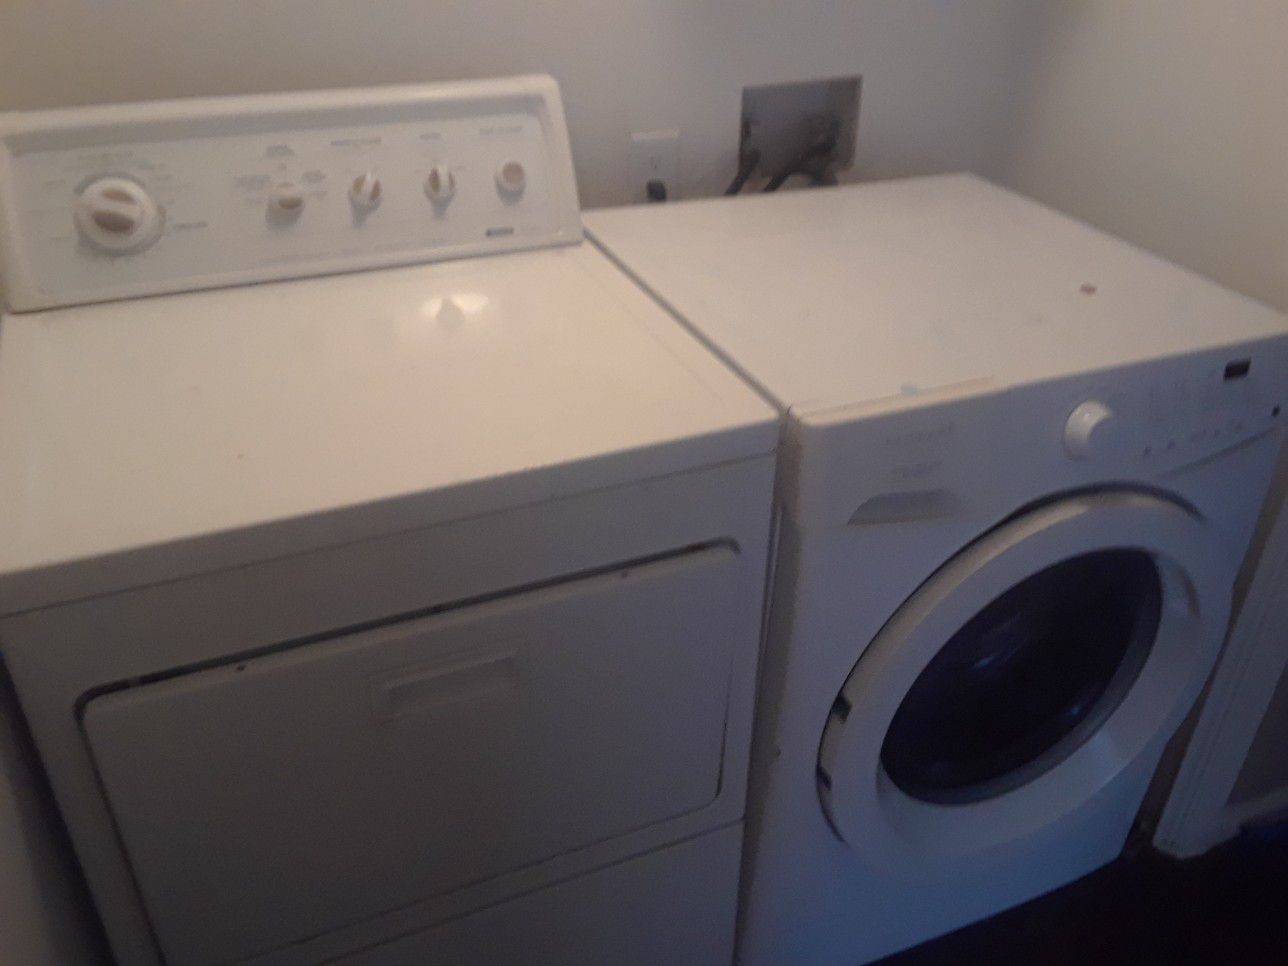 Frigidaire washer and Kenmore dryer set